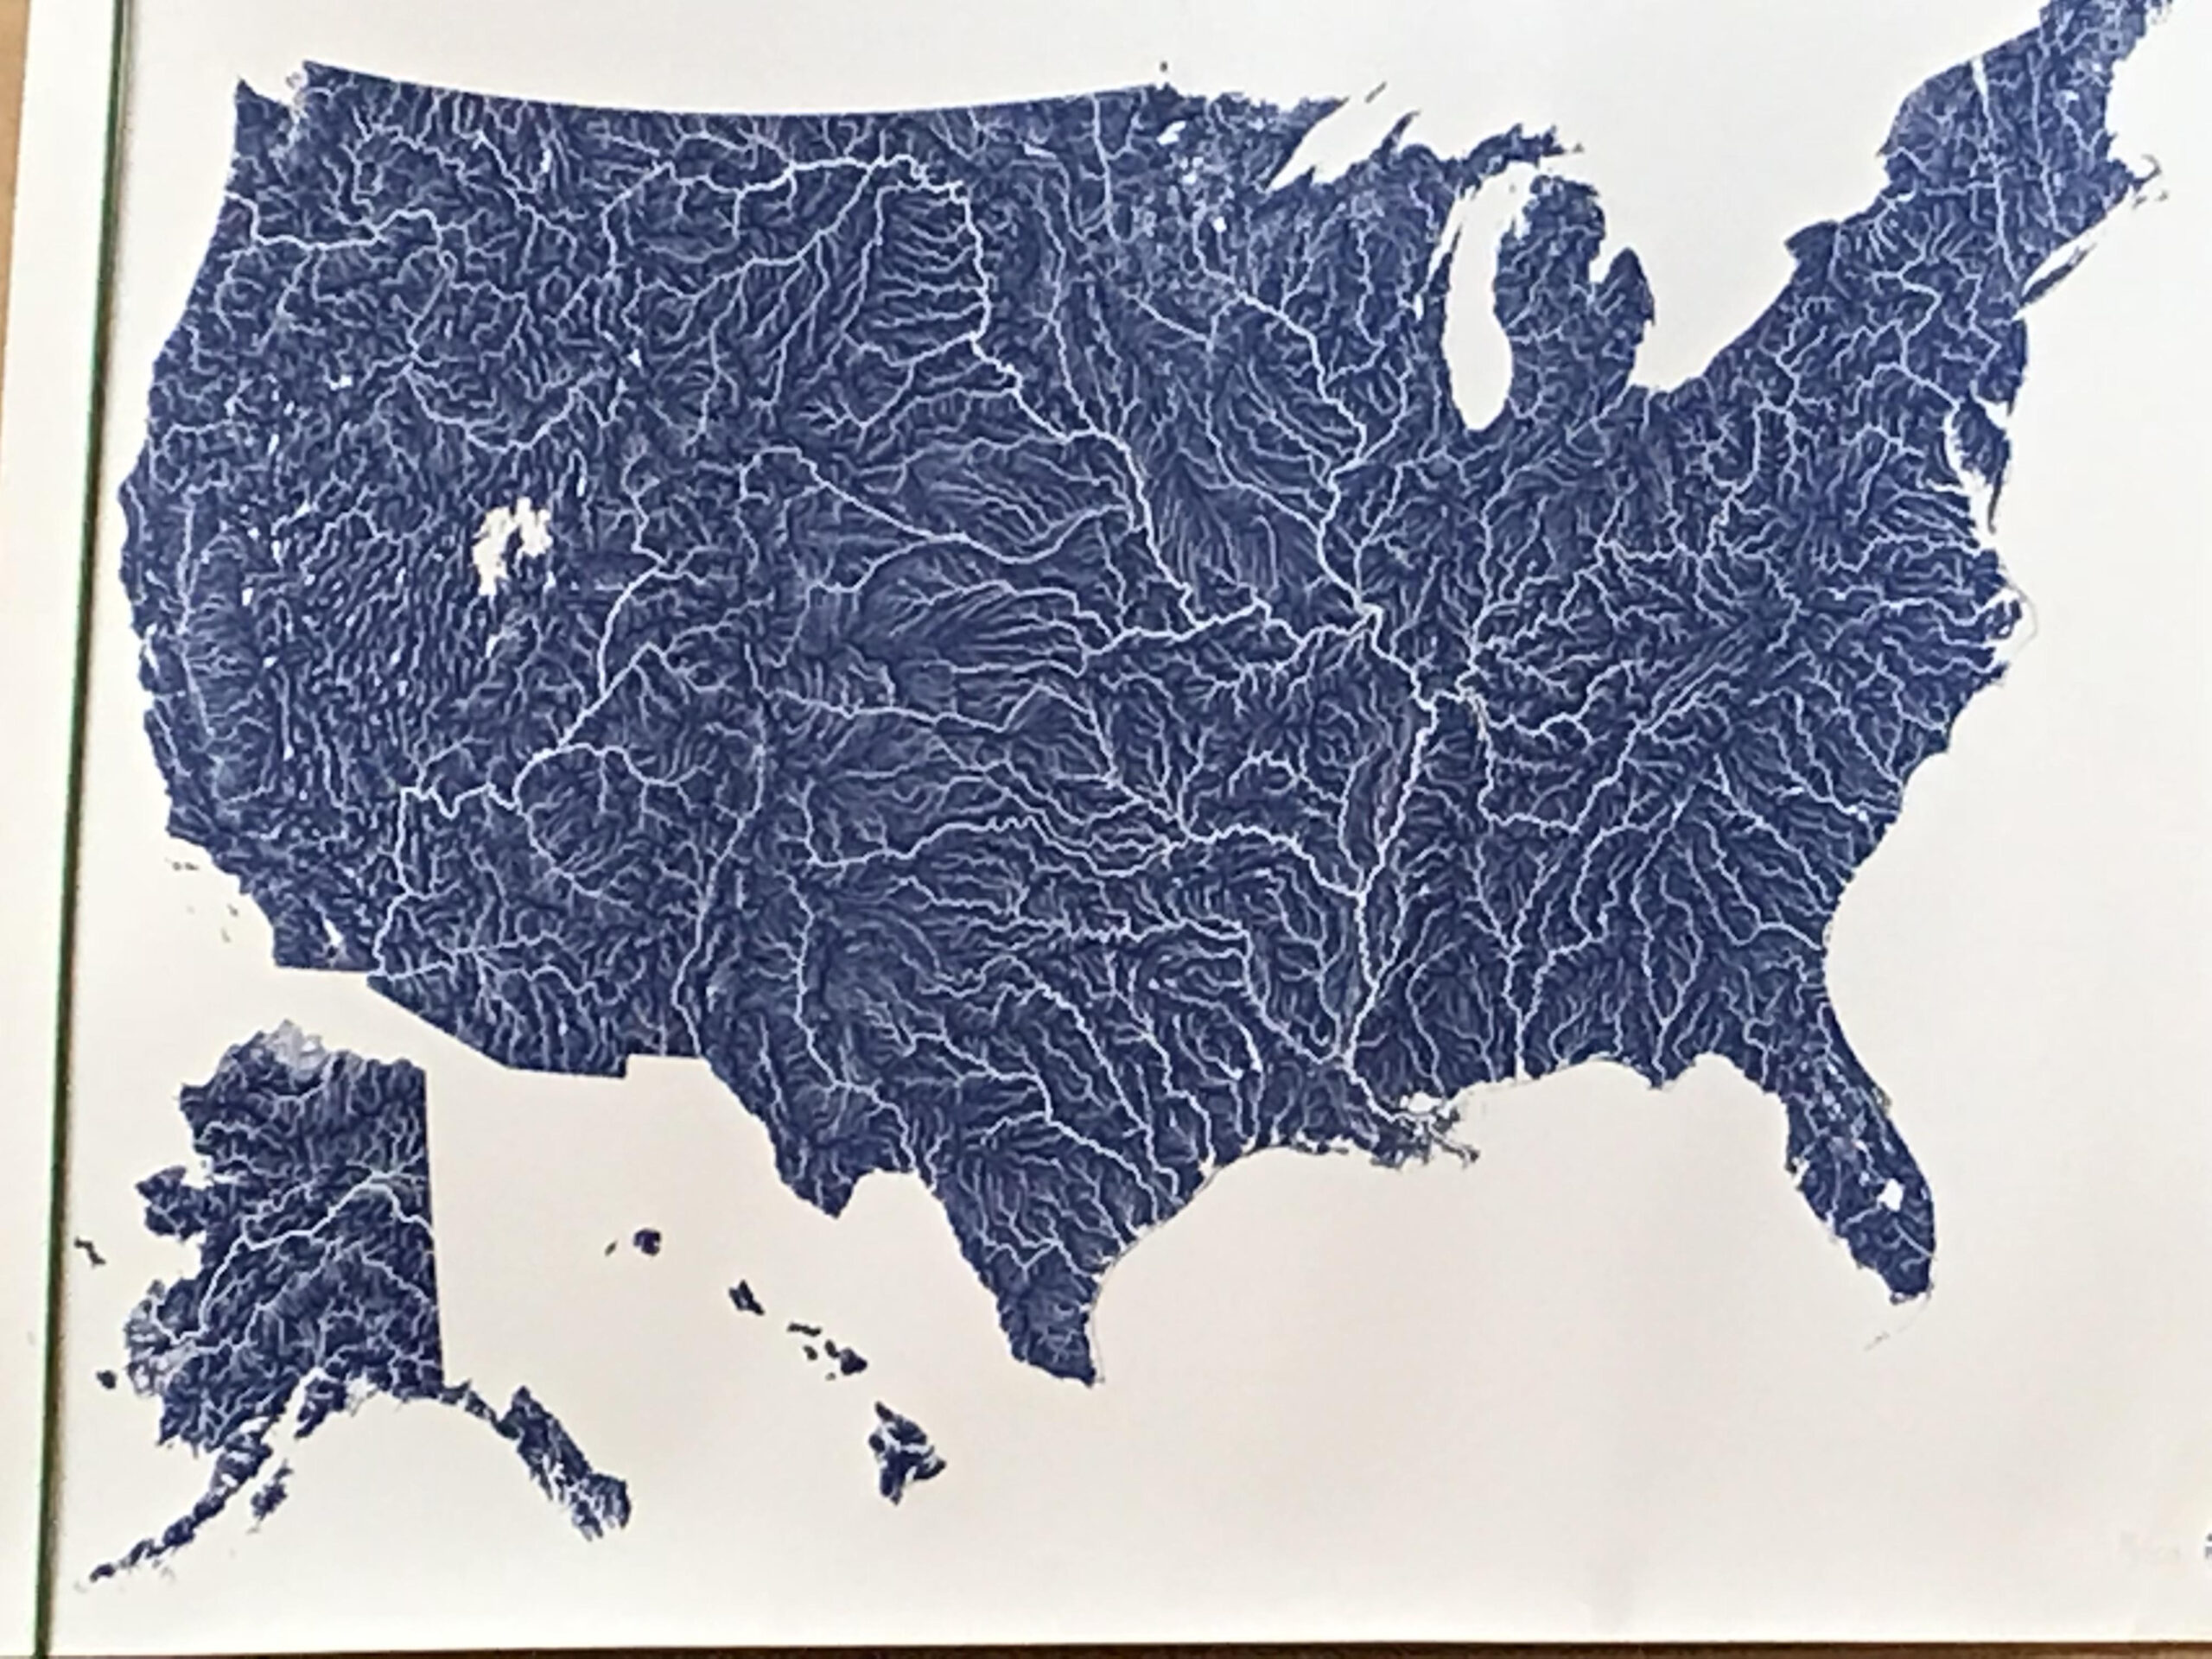 The US With All Major Bodies Of Water MapPorn